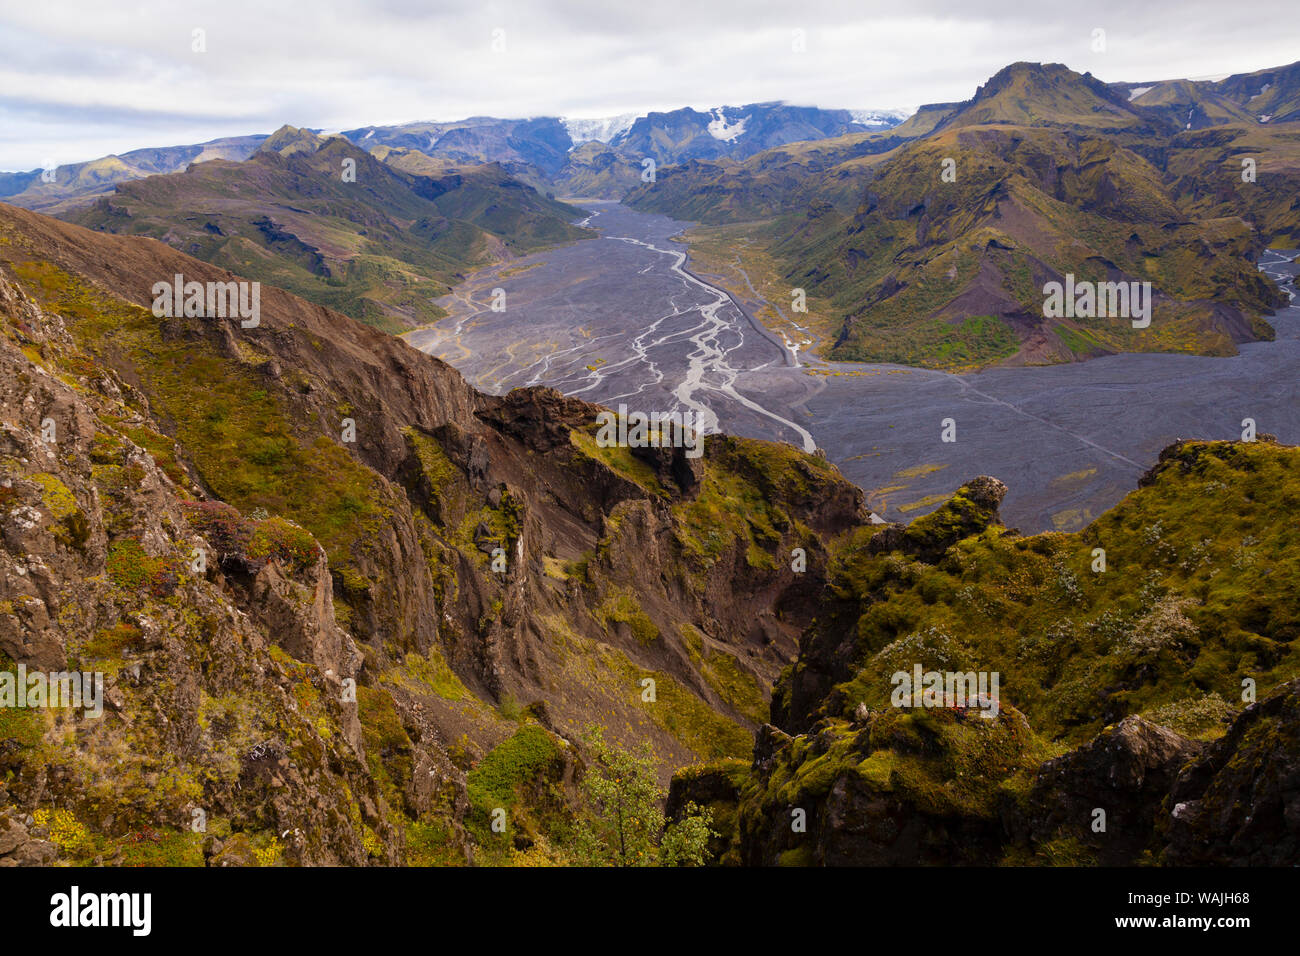 Mountain landscape and Krossa river in the Icelandic interior, Thorsmork, Iceland Stock Photo